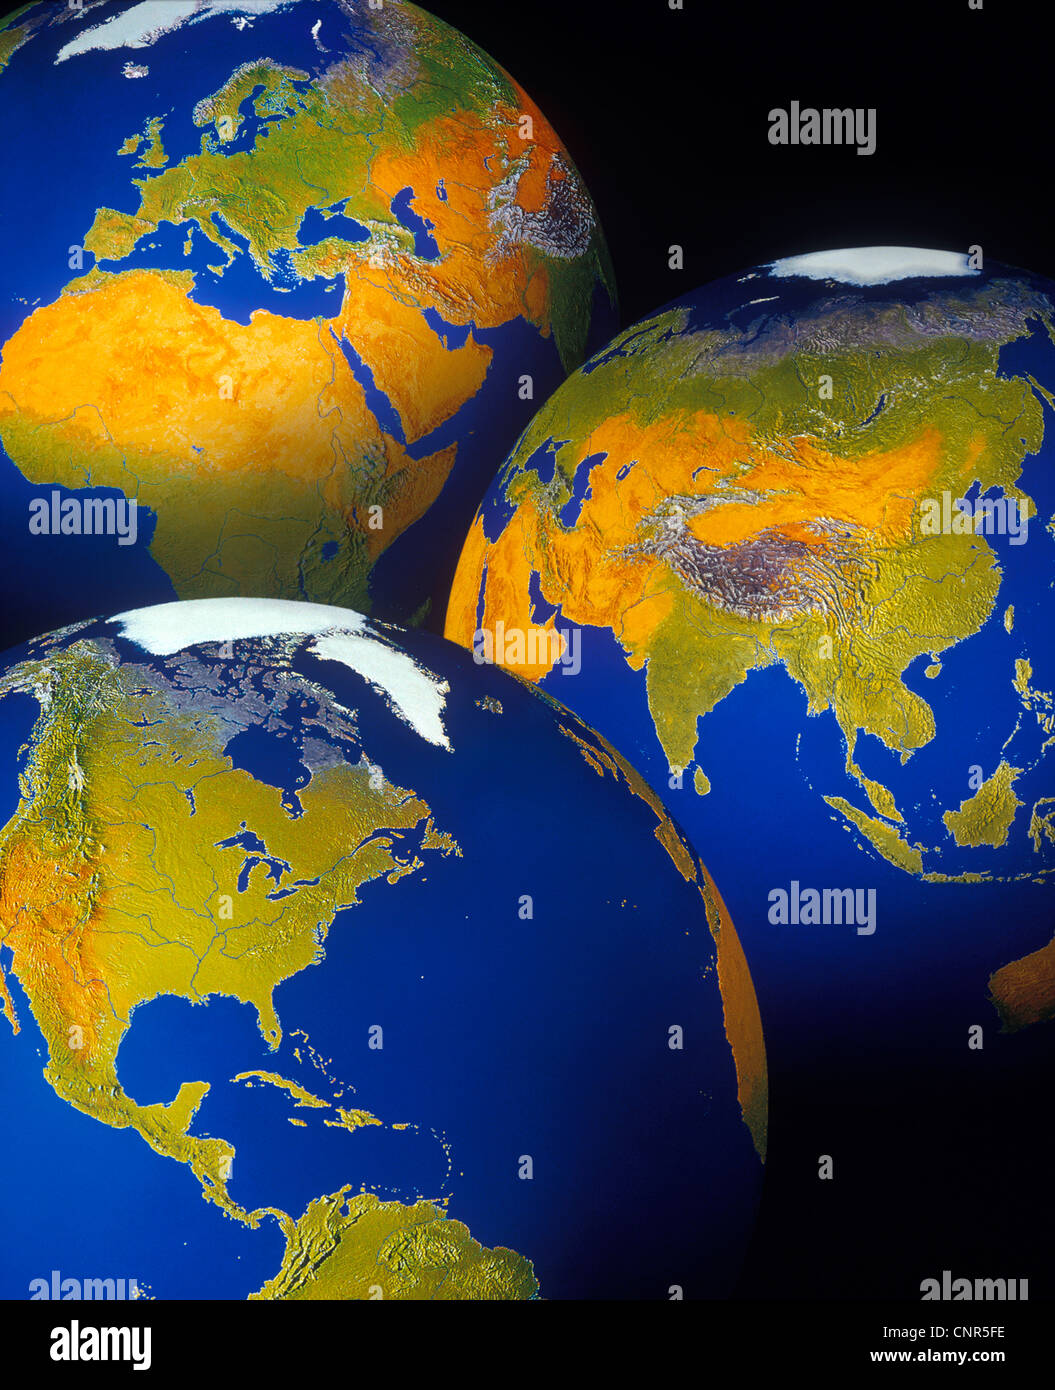 3 Globes of the Earth Stock Photo